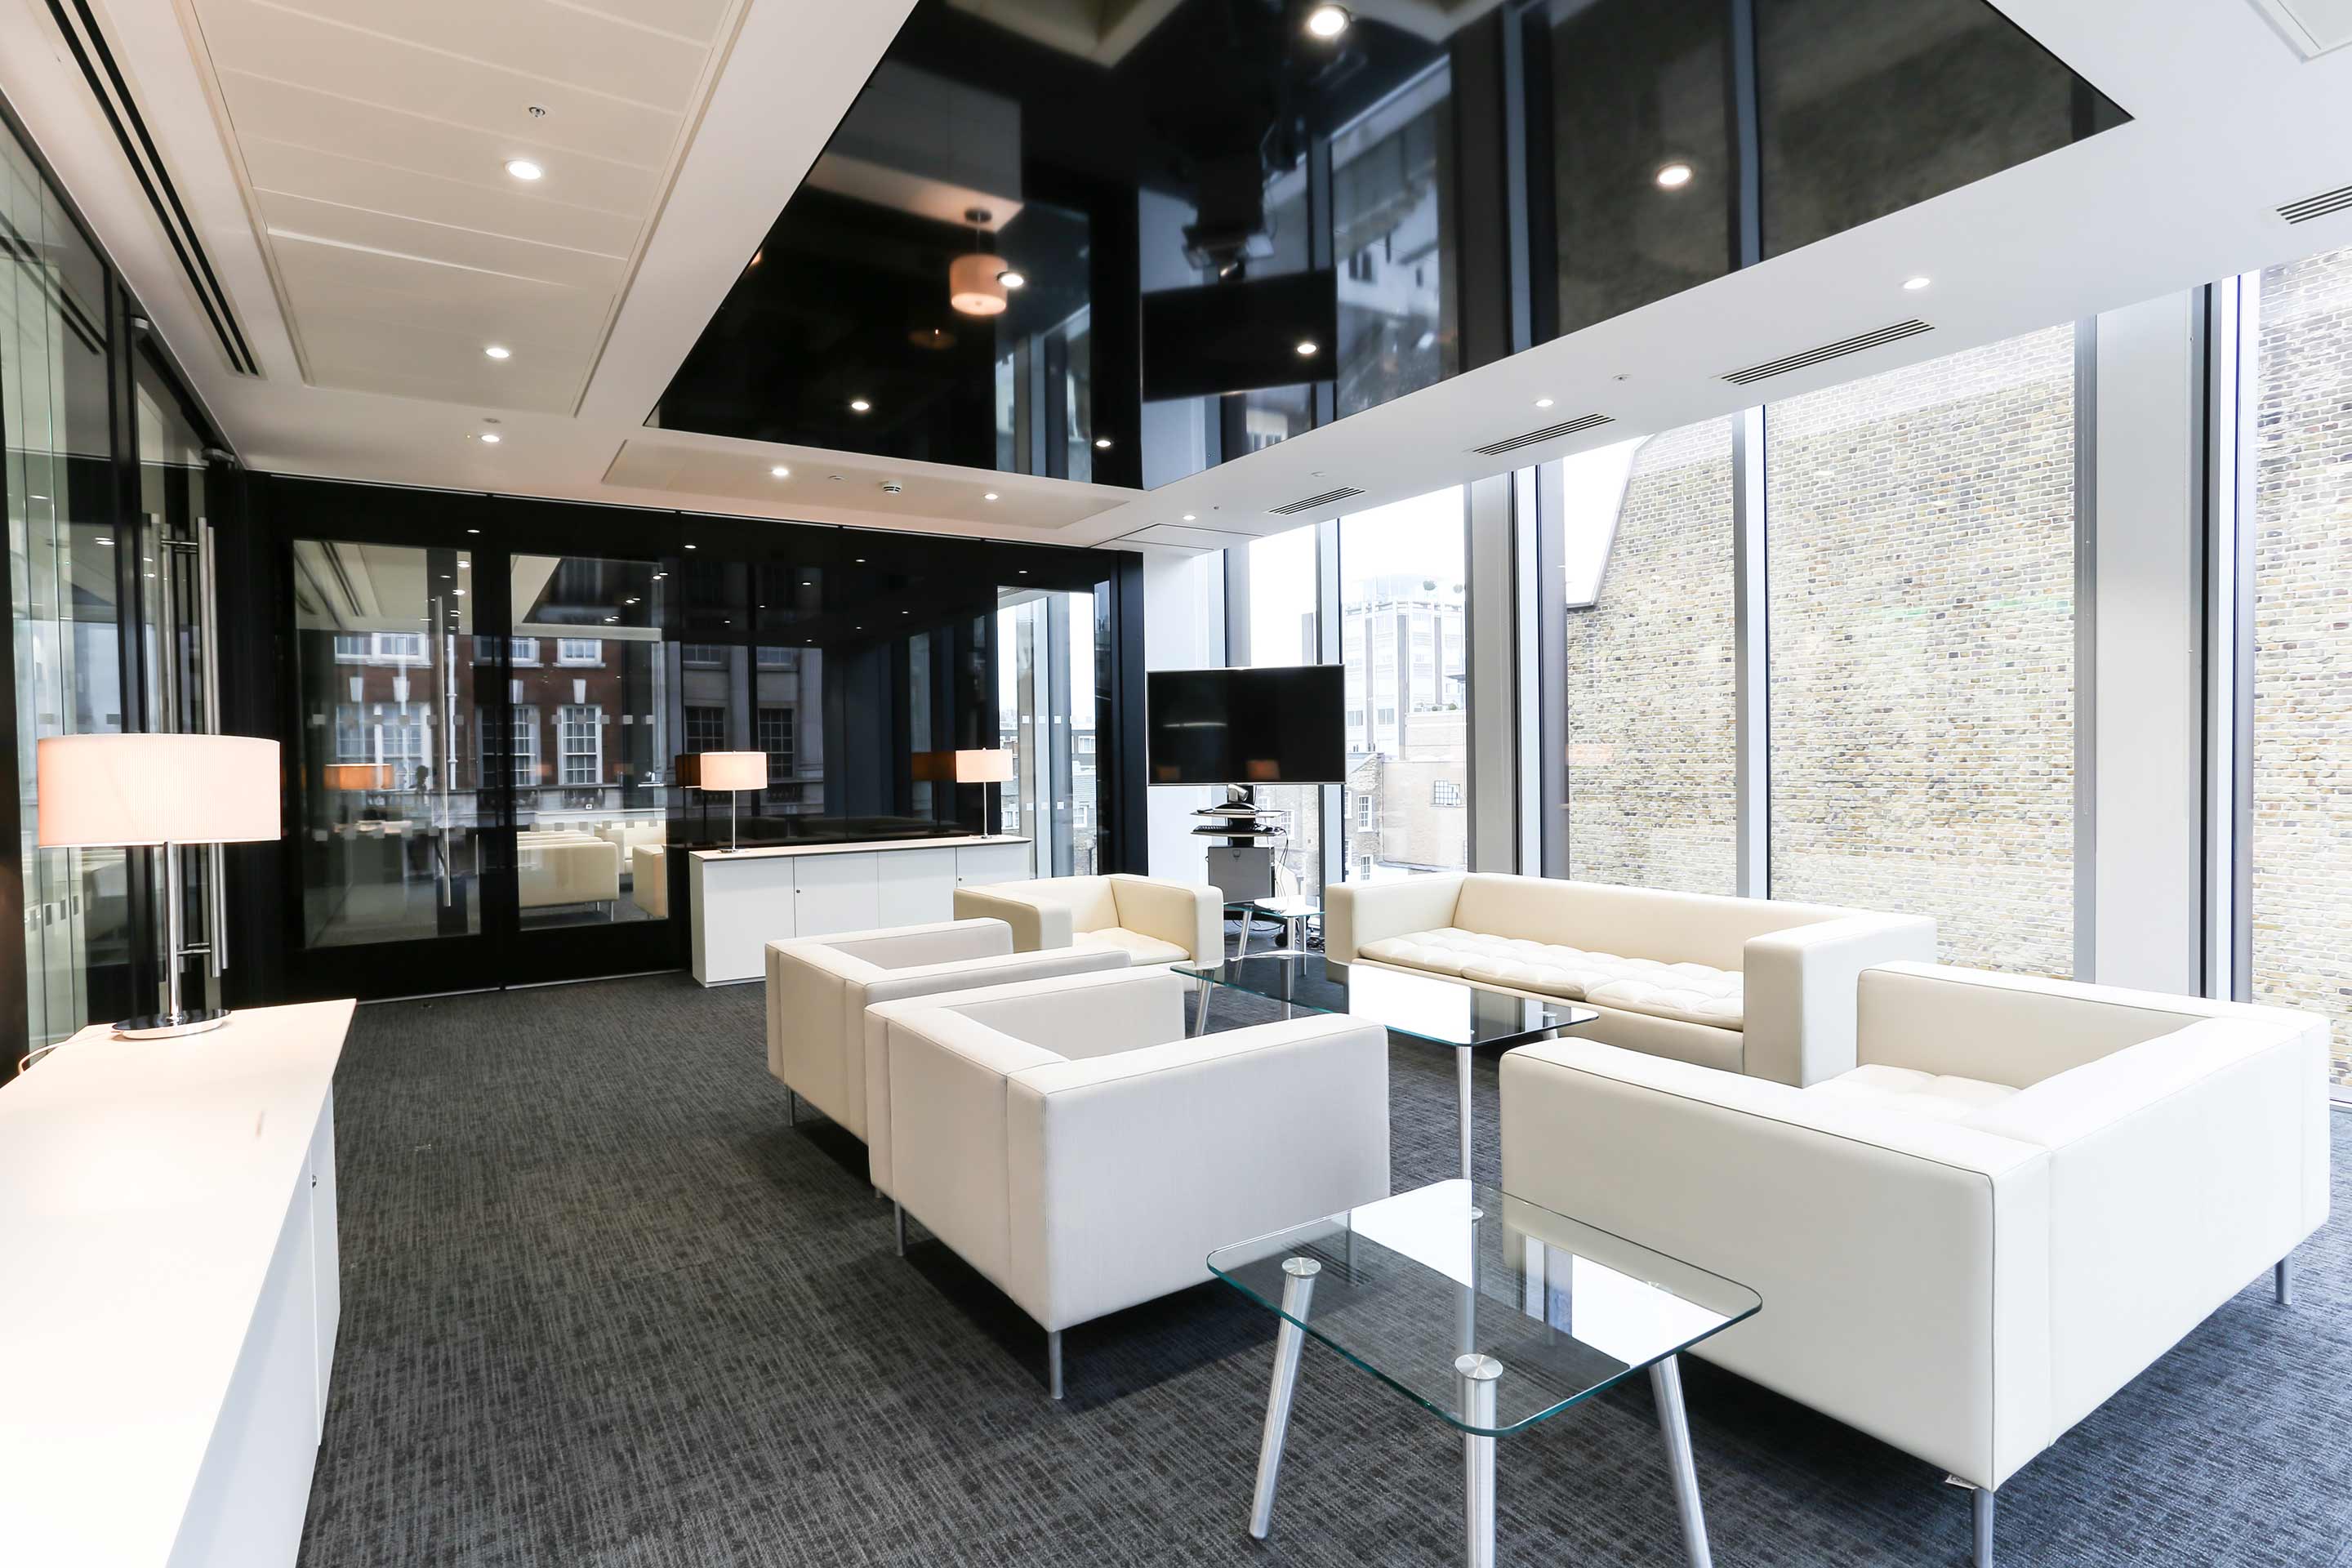 Soft leather seating in Arrowgrass' workspace